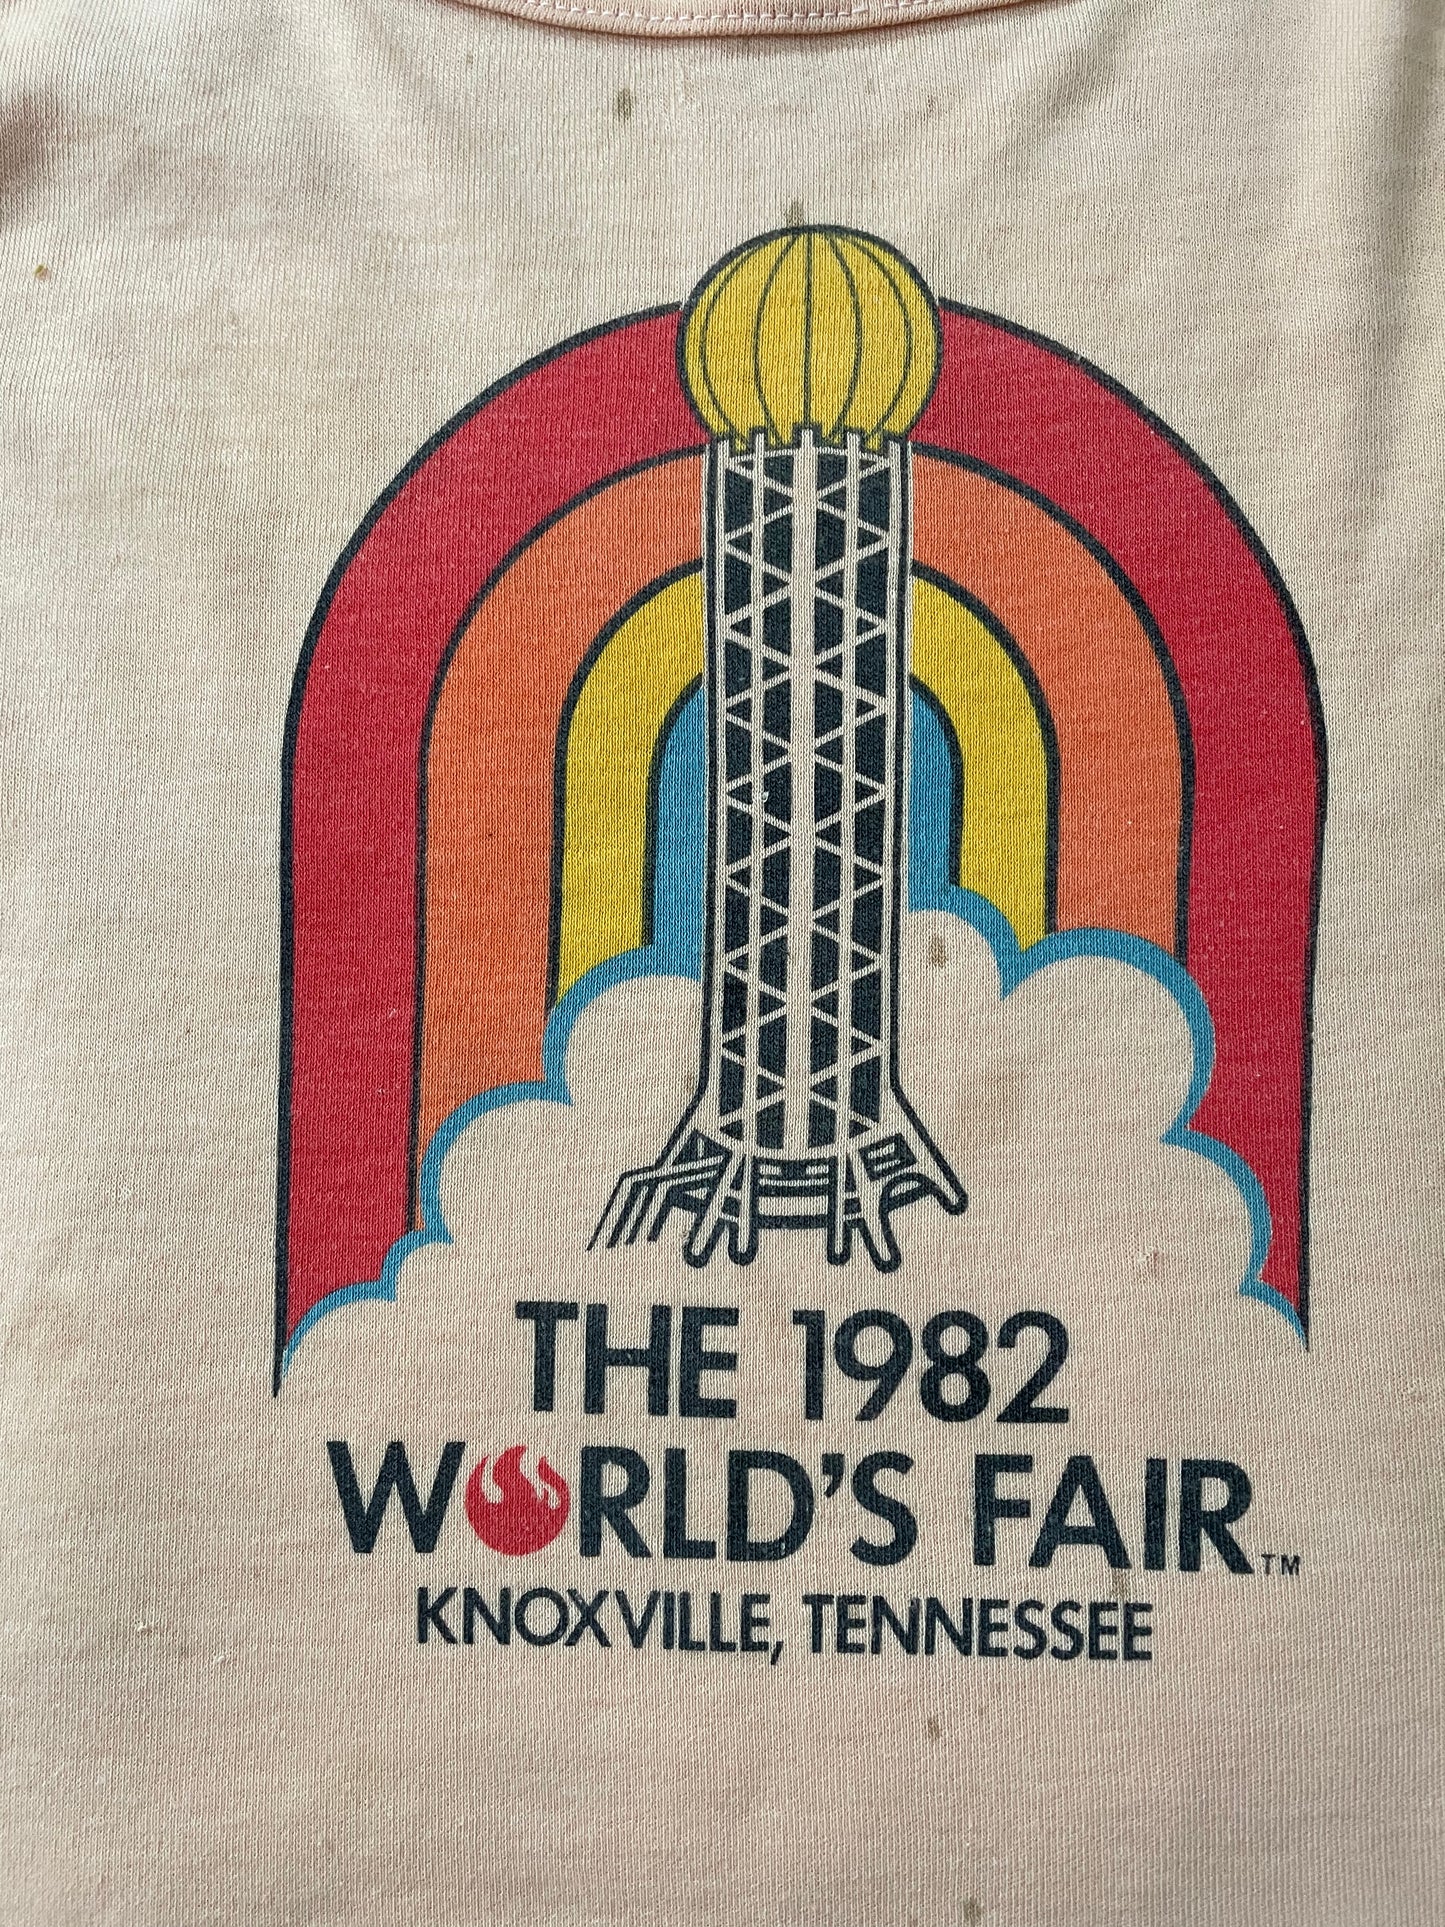 1982 World’s Fair Knoxville, Tennessee Tank Top